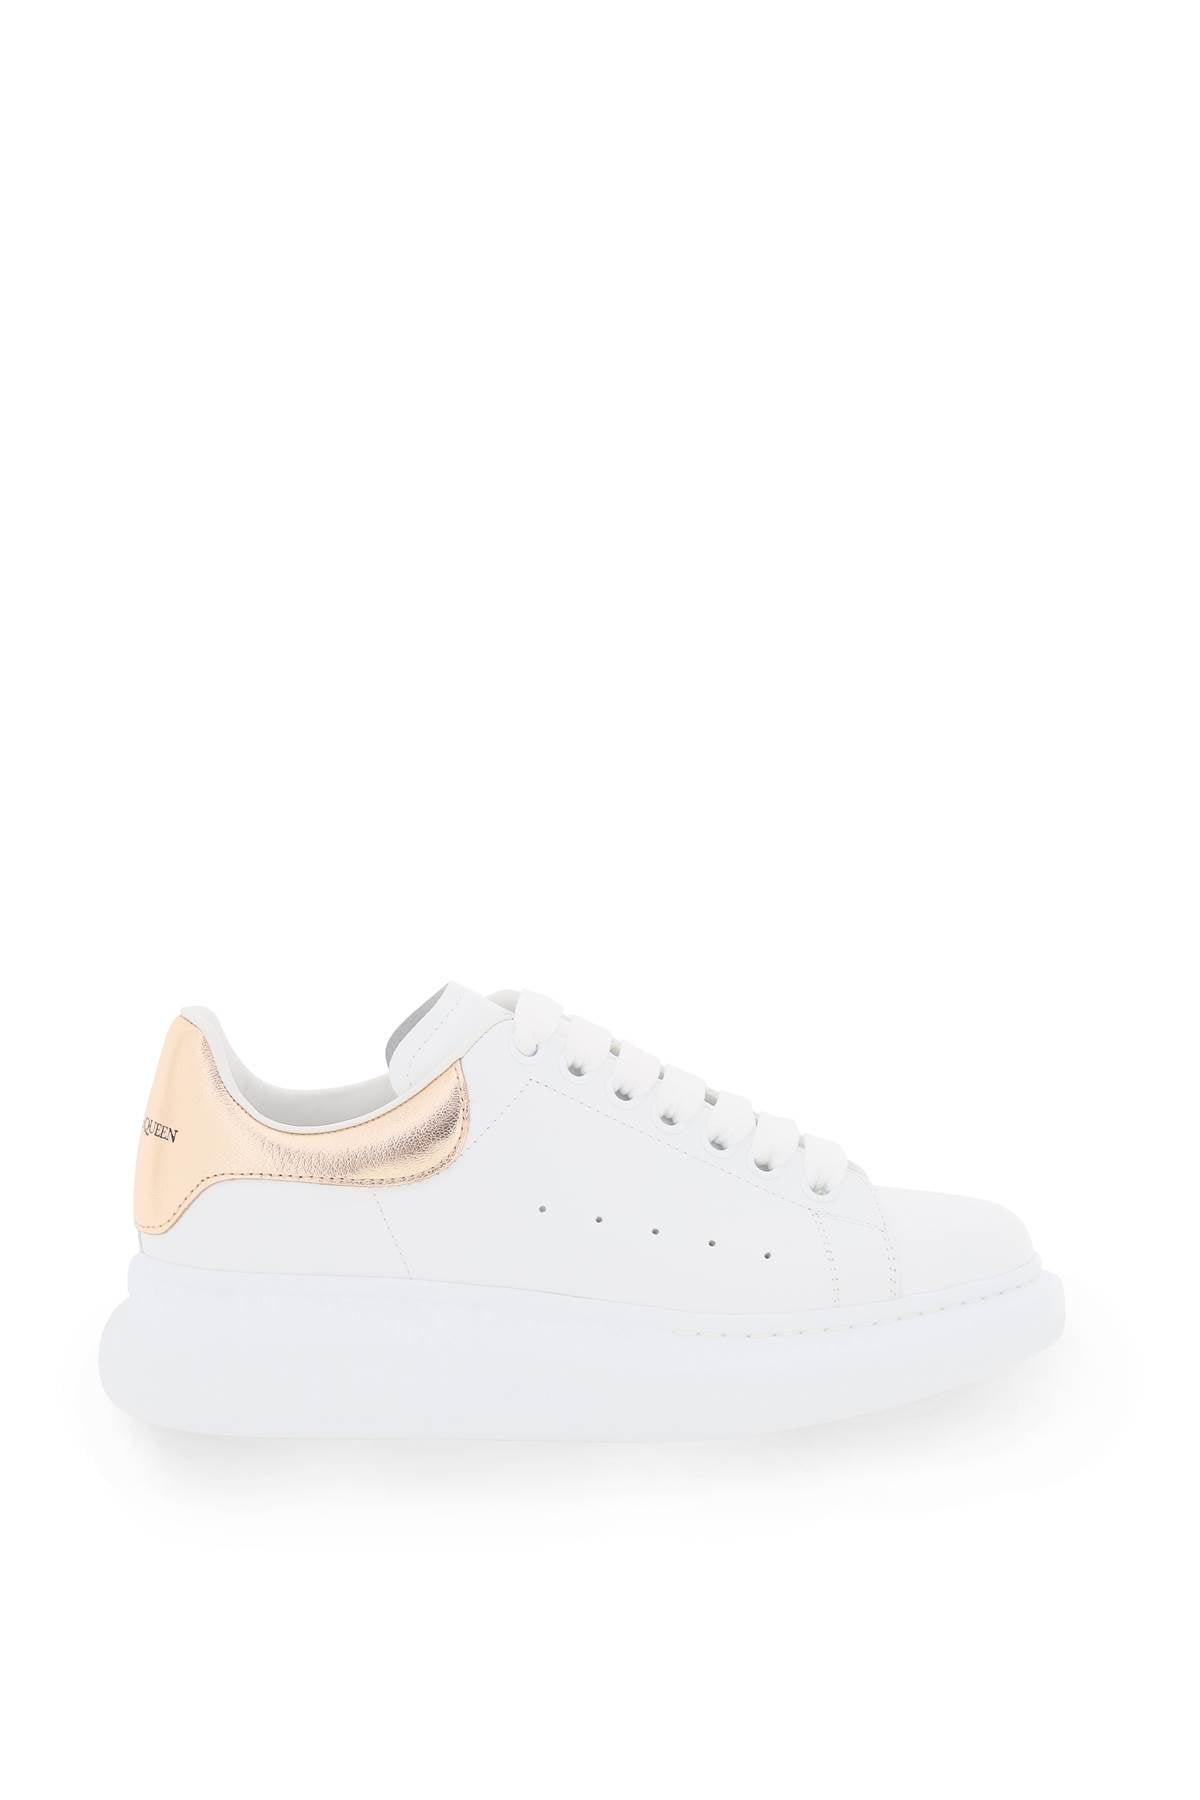 Alexander mcqueen oversize sneakers 553770 WHFBU WHITE ROSE GOLD